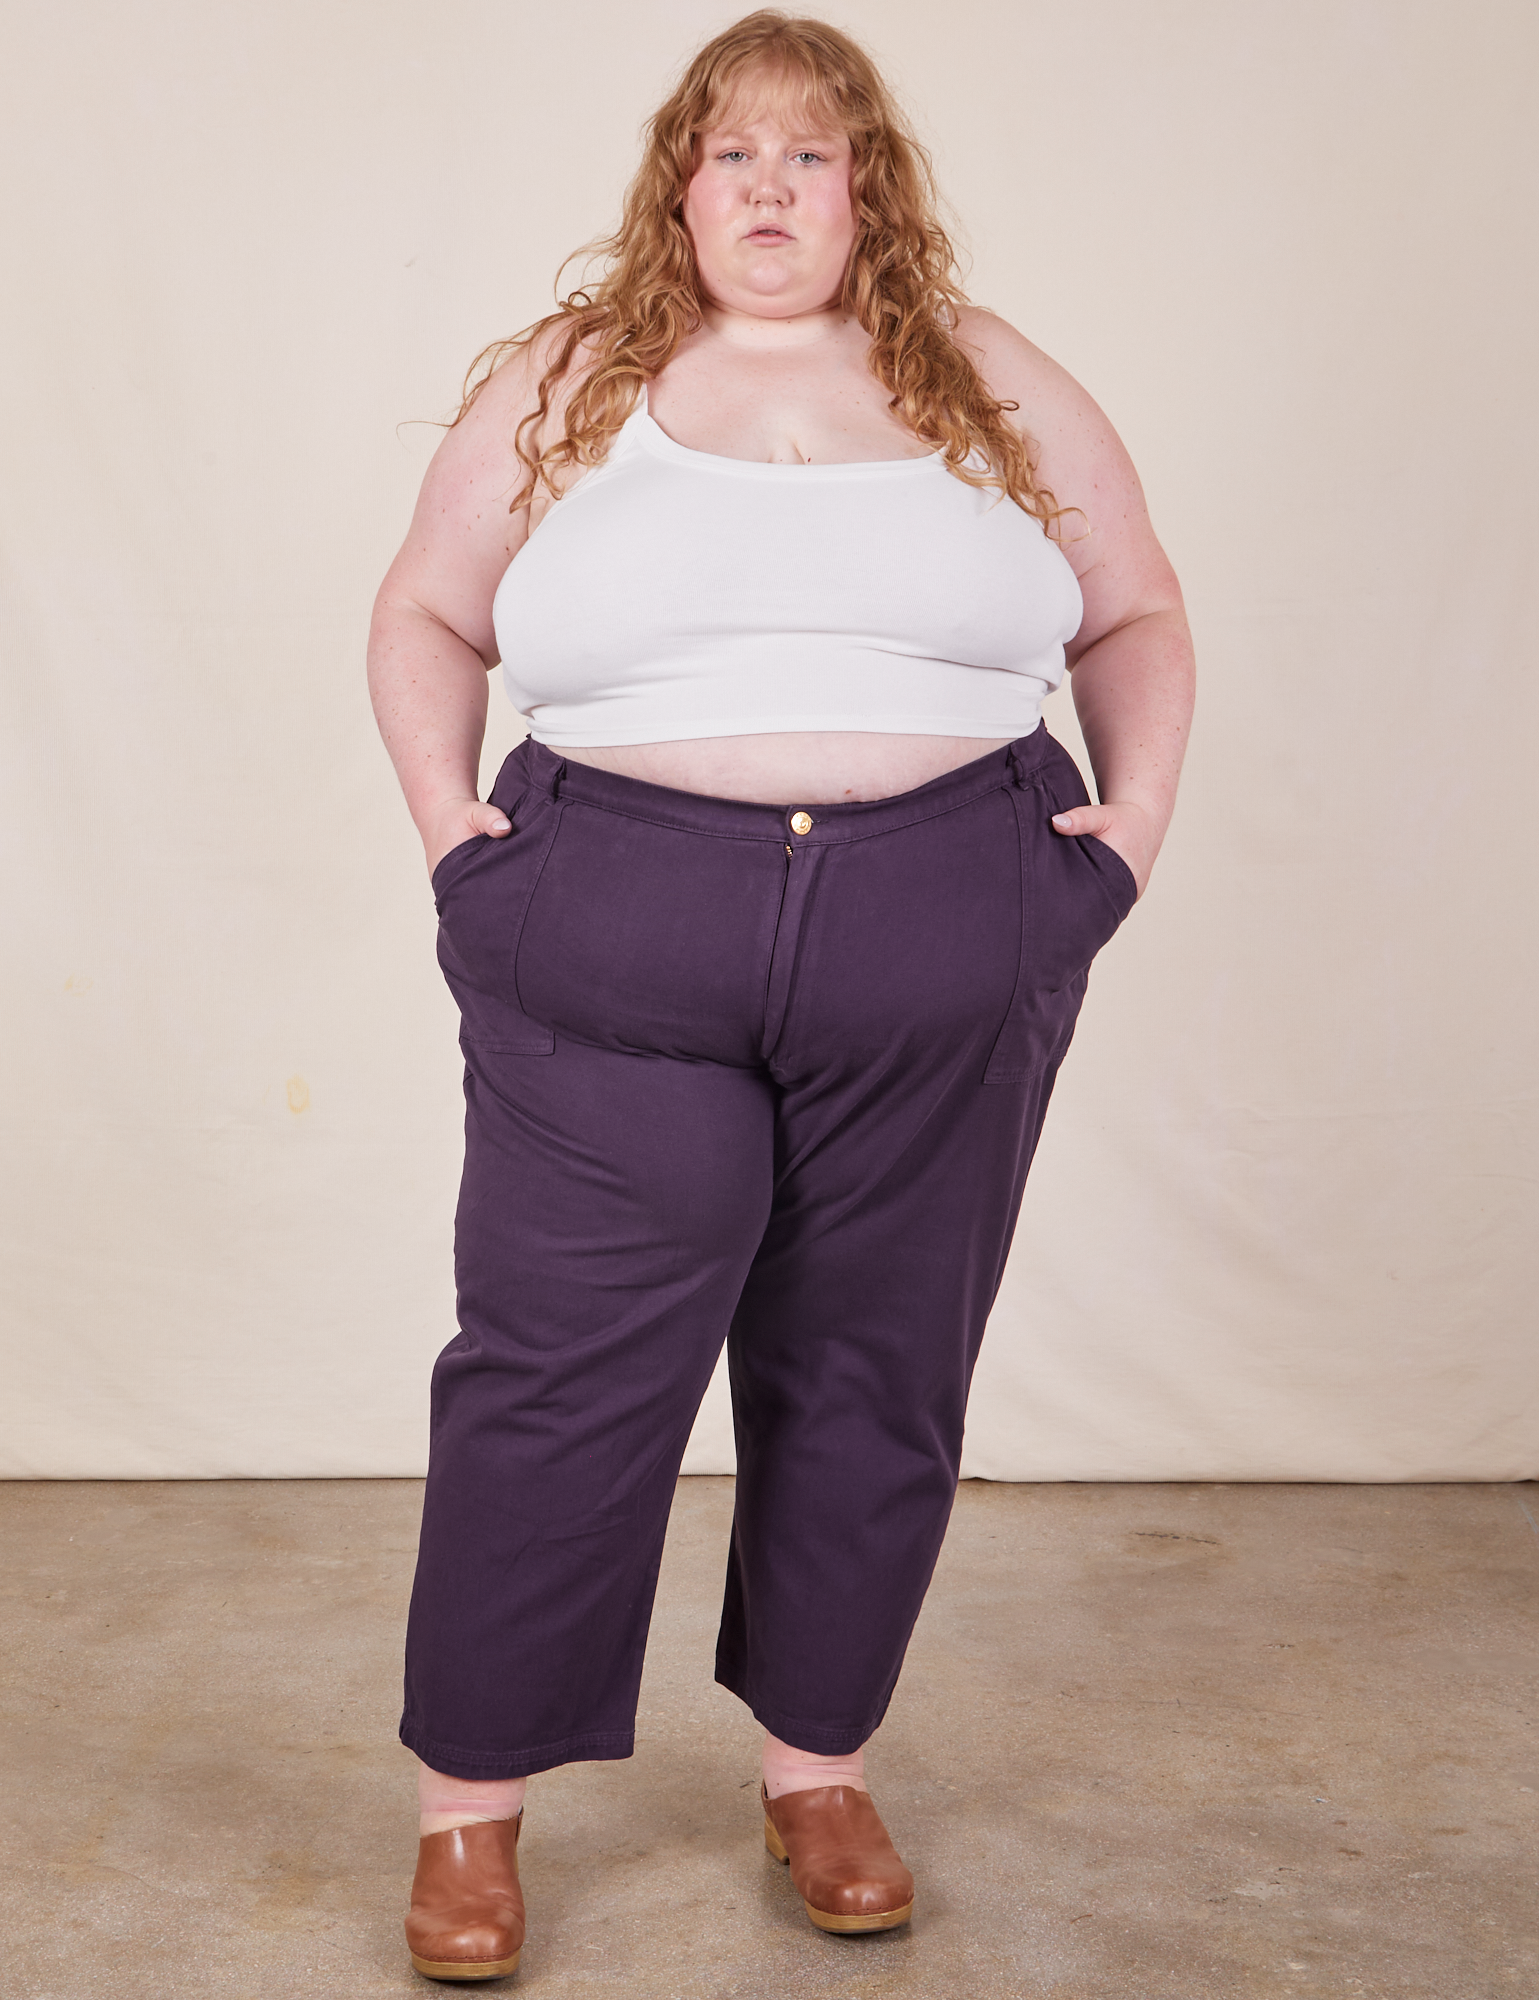 Catie is 5&#39;11&quot; and wearing 5XL Work Pants in Nebula Purple and vintage off-white Cami